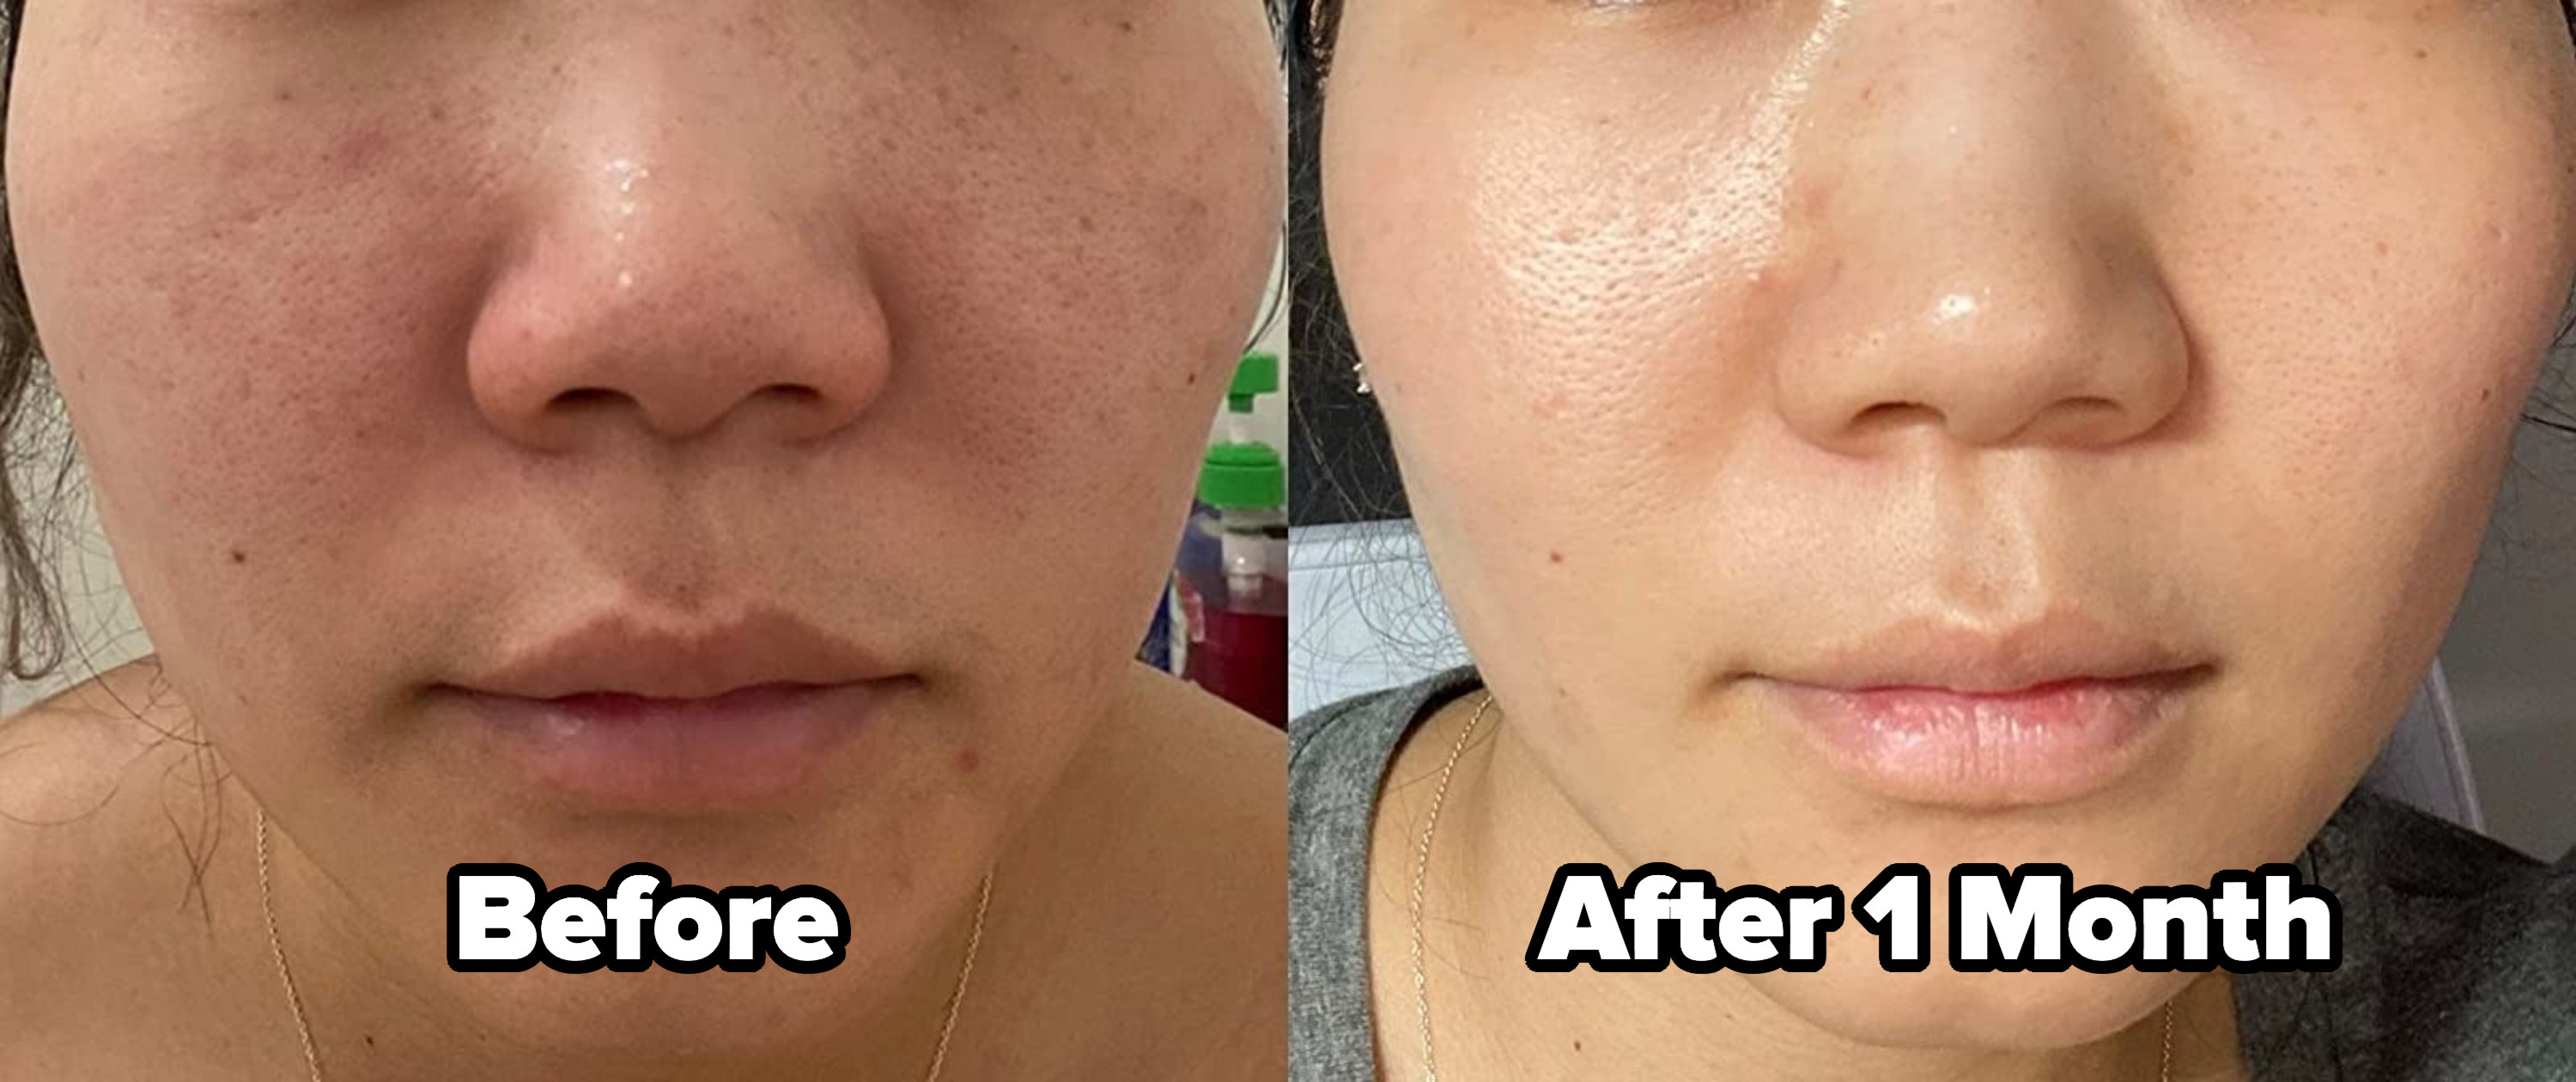 on the left, a reviewers skin with hyperpigmentation on the cheeks labeled &quot;before&quot; and, on the right, the same reviewer with their skin clear and glowy labeled &quot;after 1 month&quot;